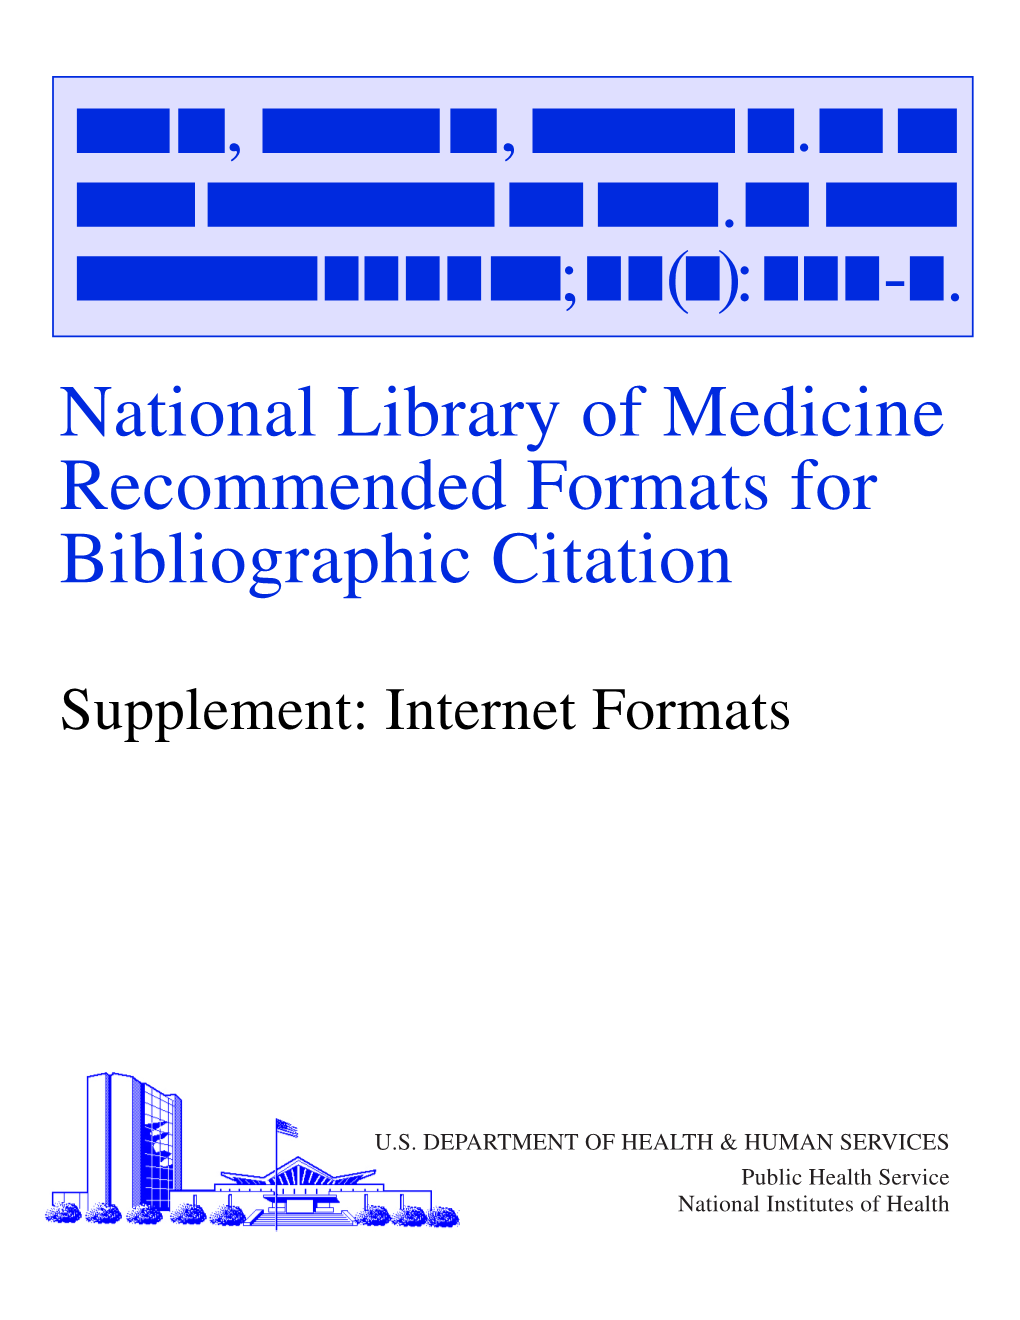 National Library of Medicine Recommended Formats for Bibliographic Citation